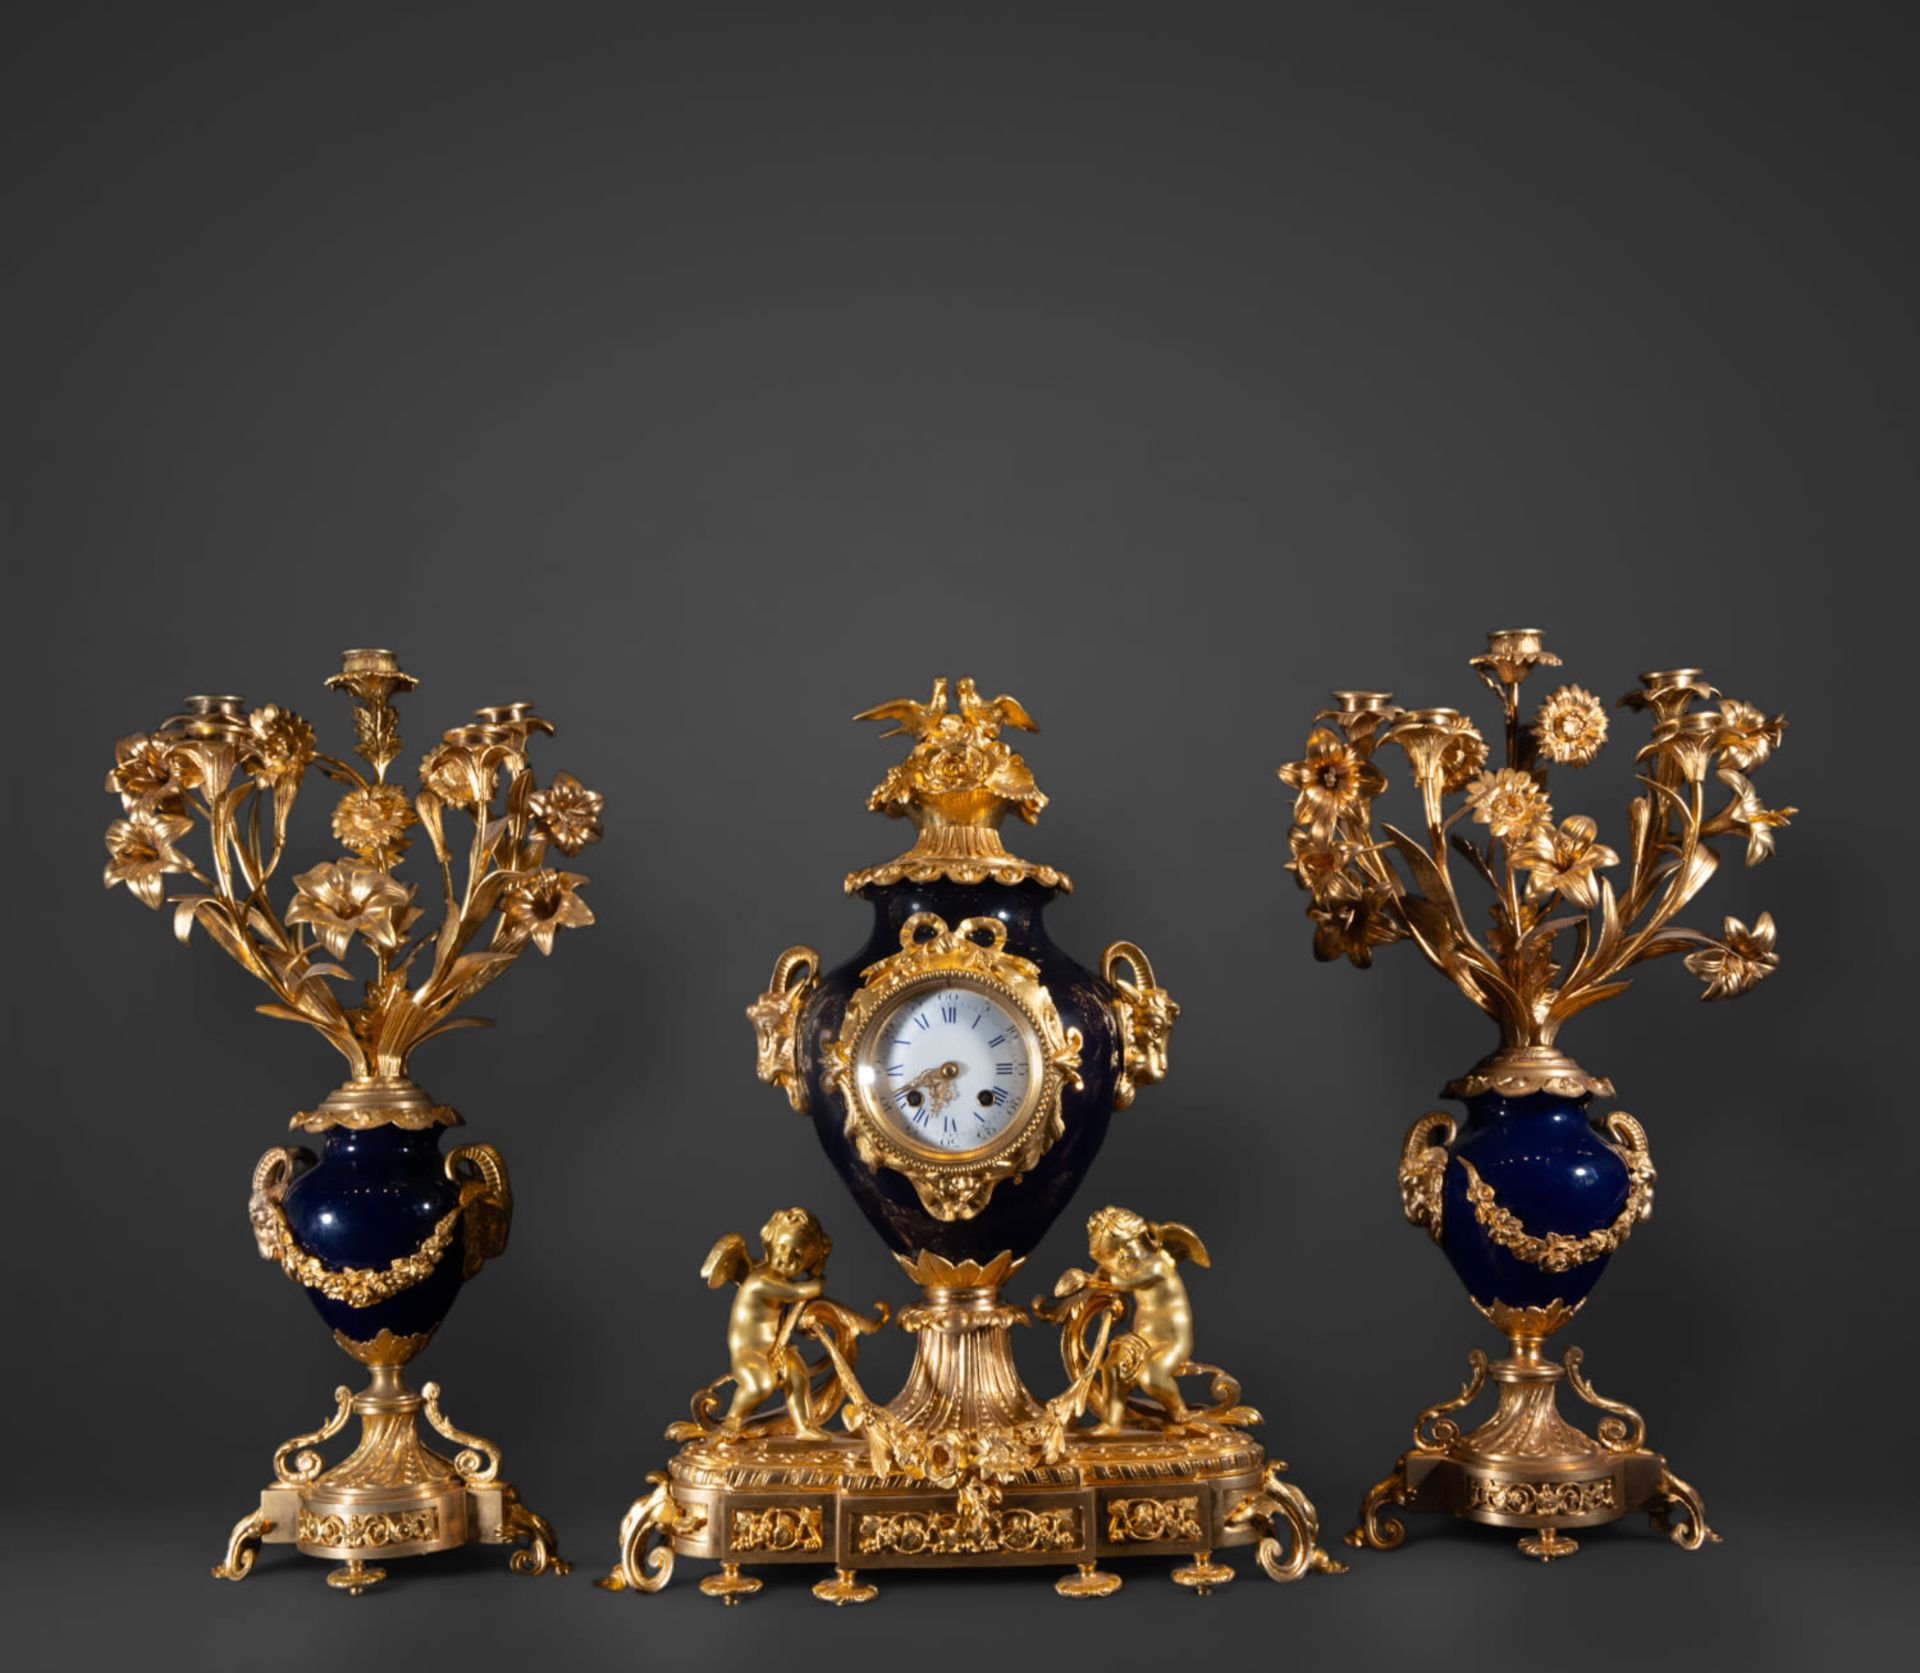 Elegant and Large Table Clock with French Sèvres Porcelain Garnish "Bleu Royale" Napoleon III of the